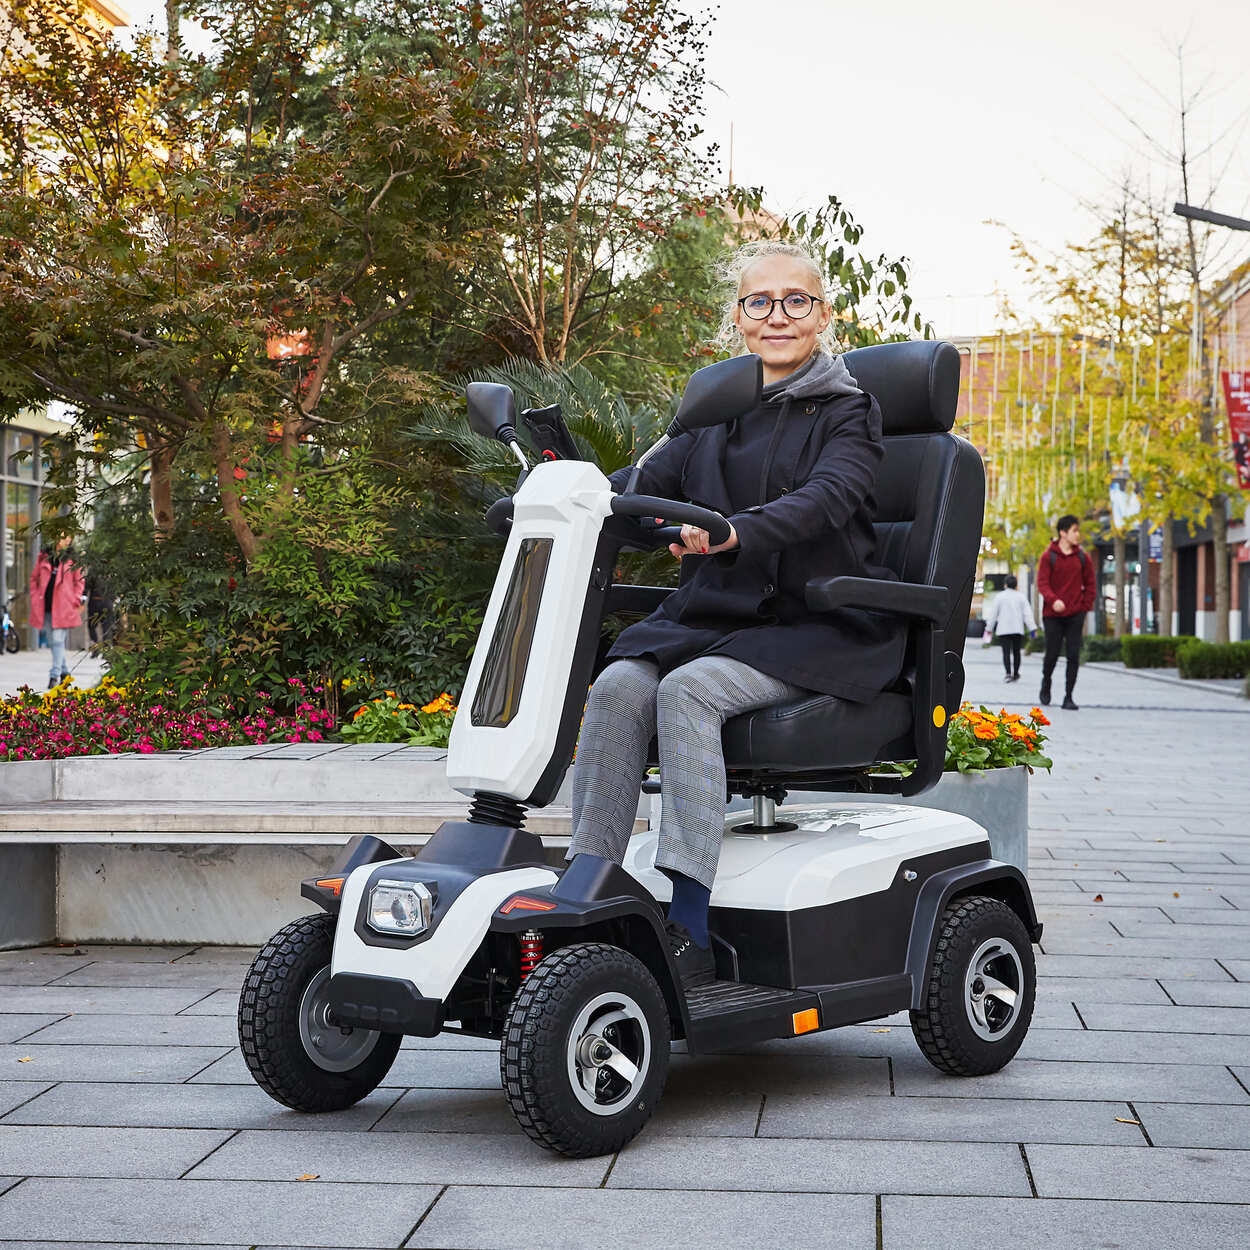 large size 4 wheel Electric Handicap Mobility Scooter